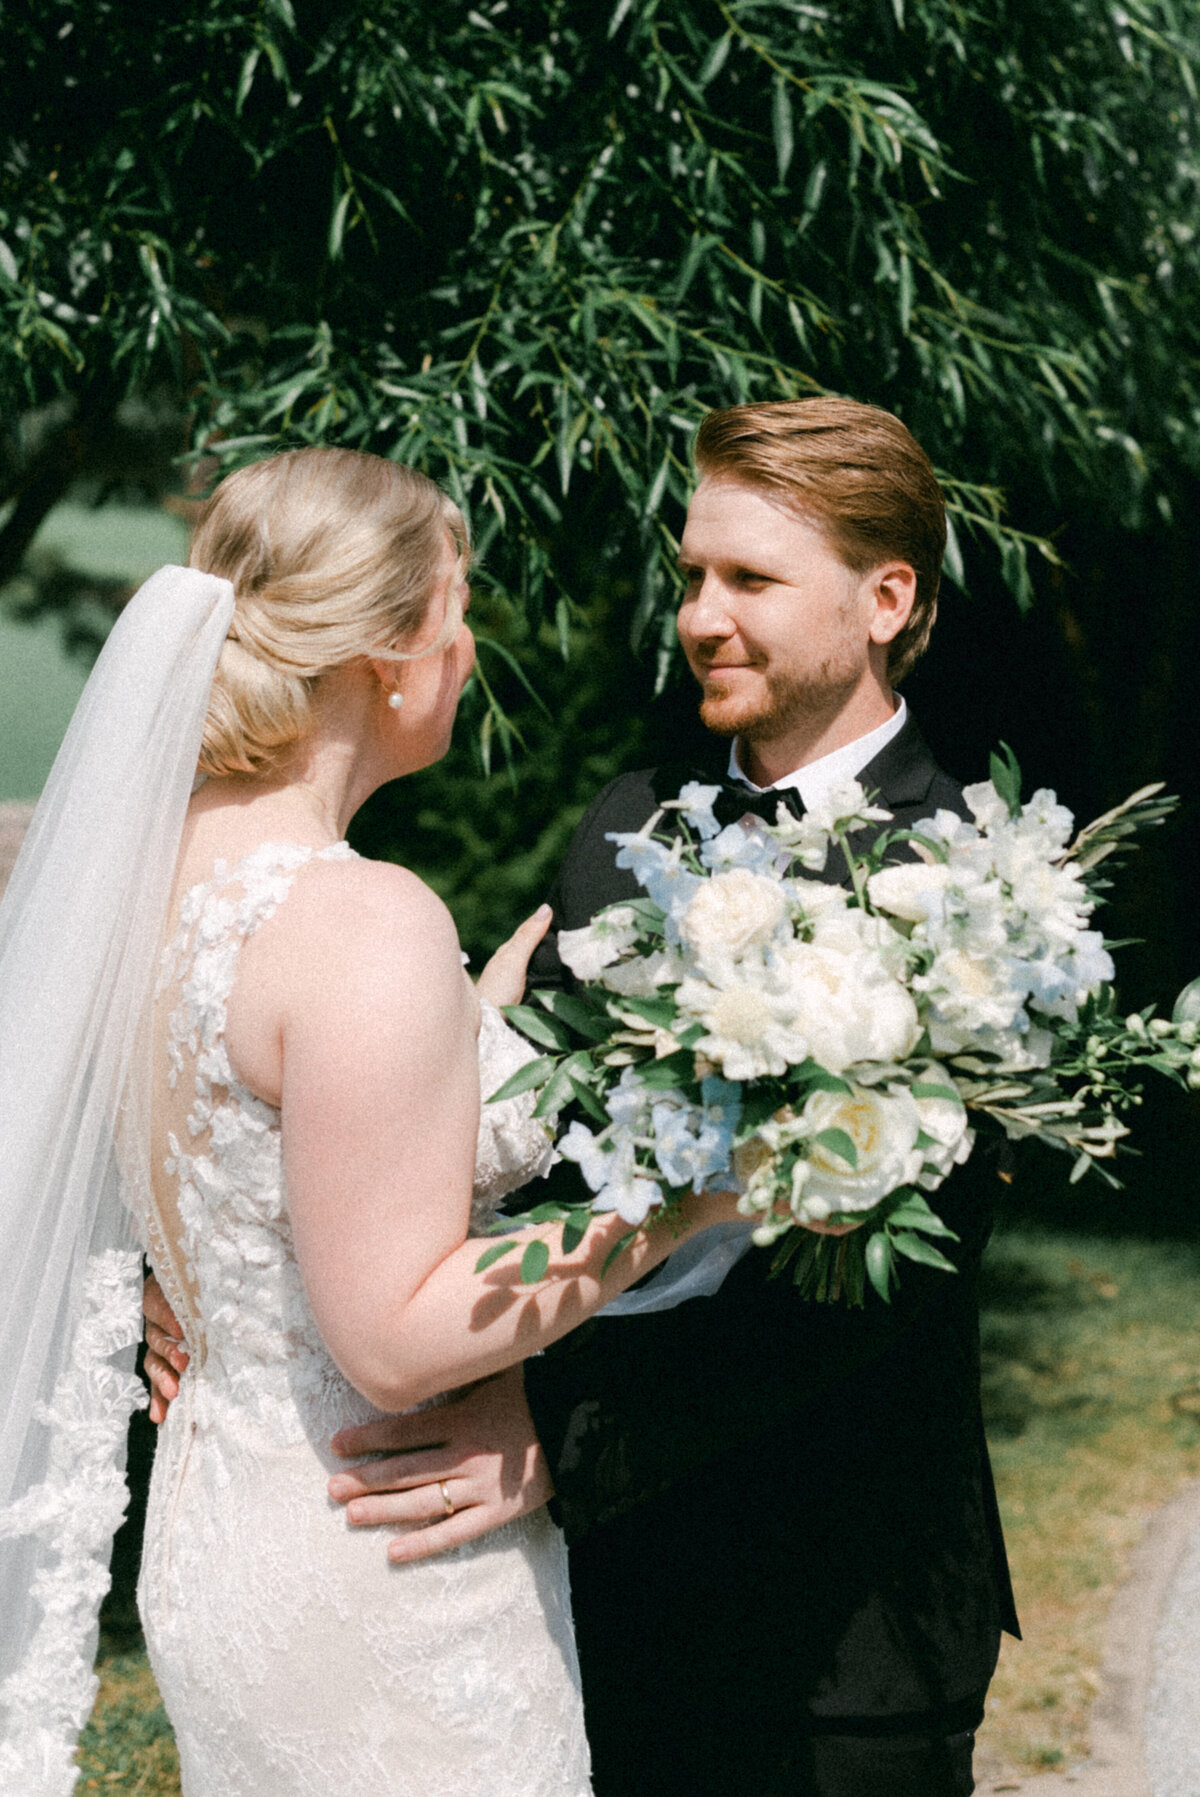 The wedding couple looking at each other photographed by wedding photographer Hannika Gabrielsson.